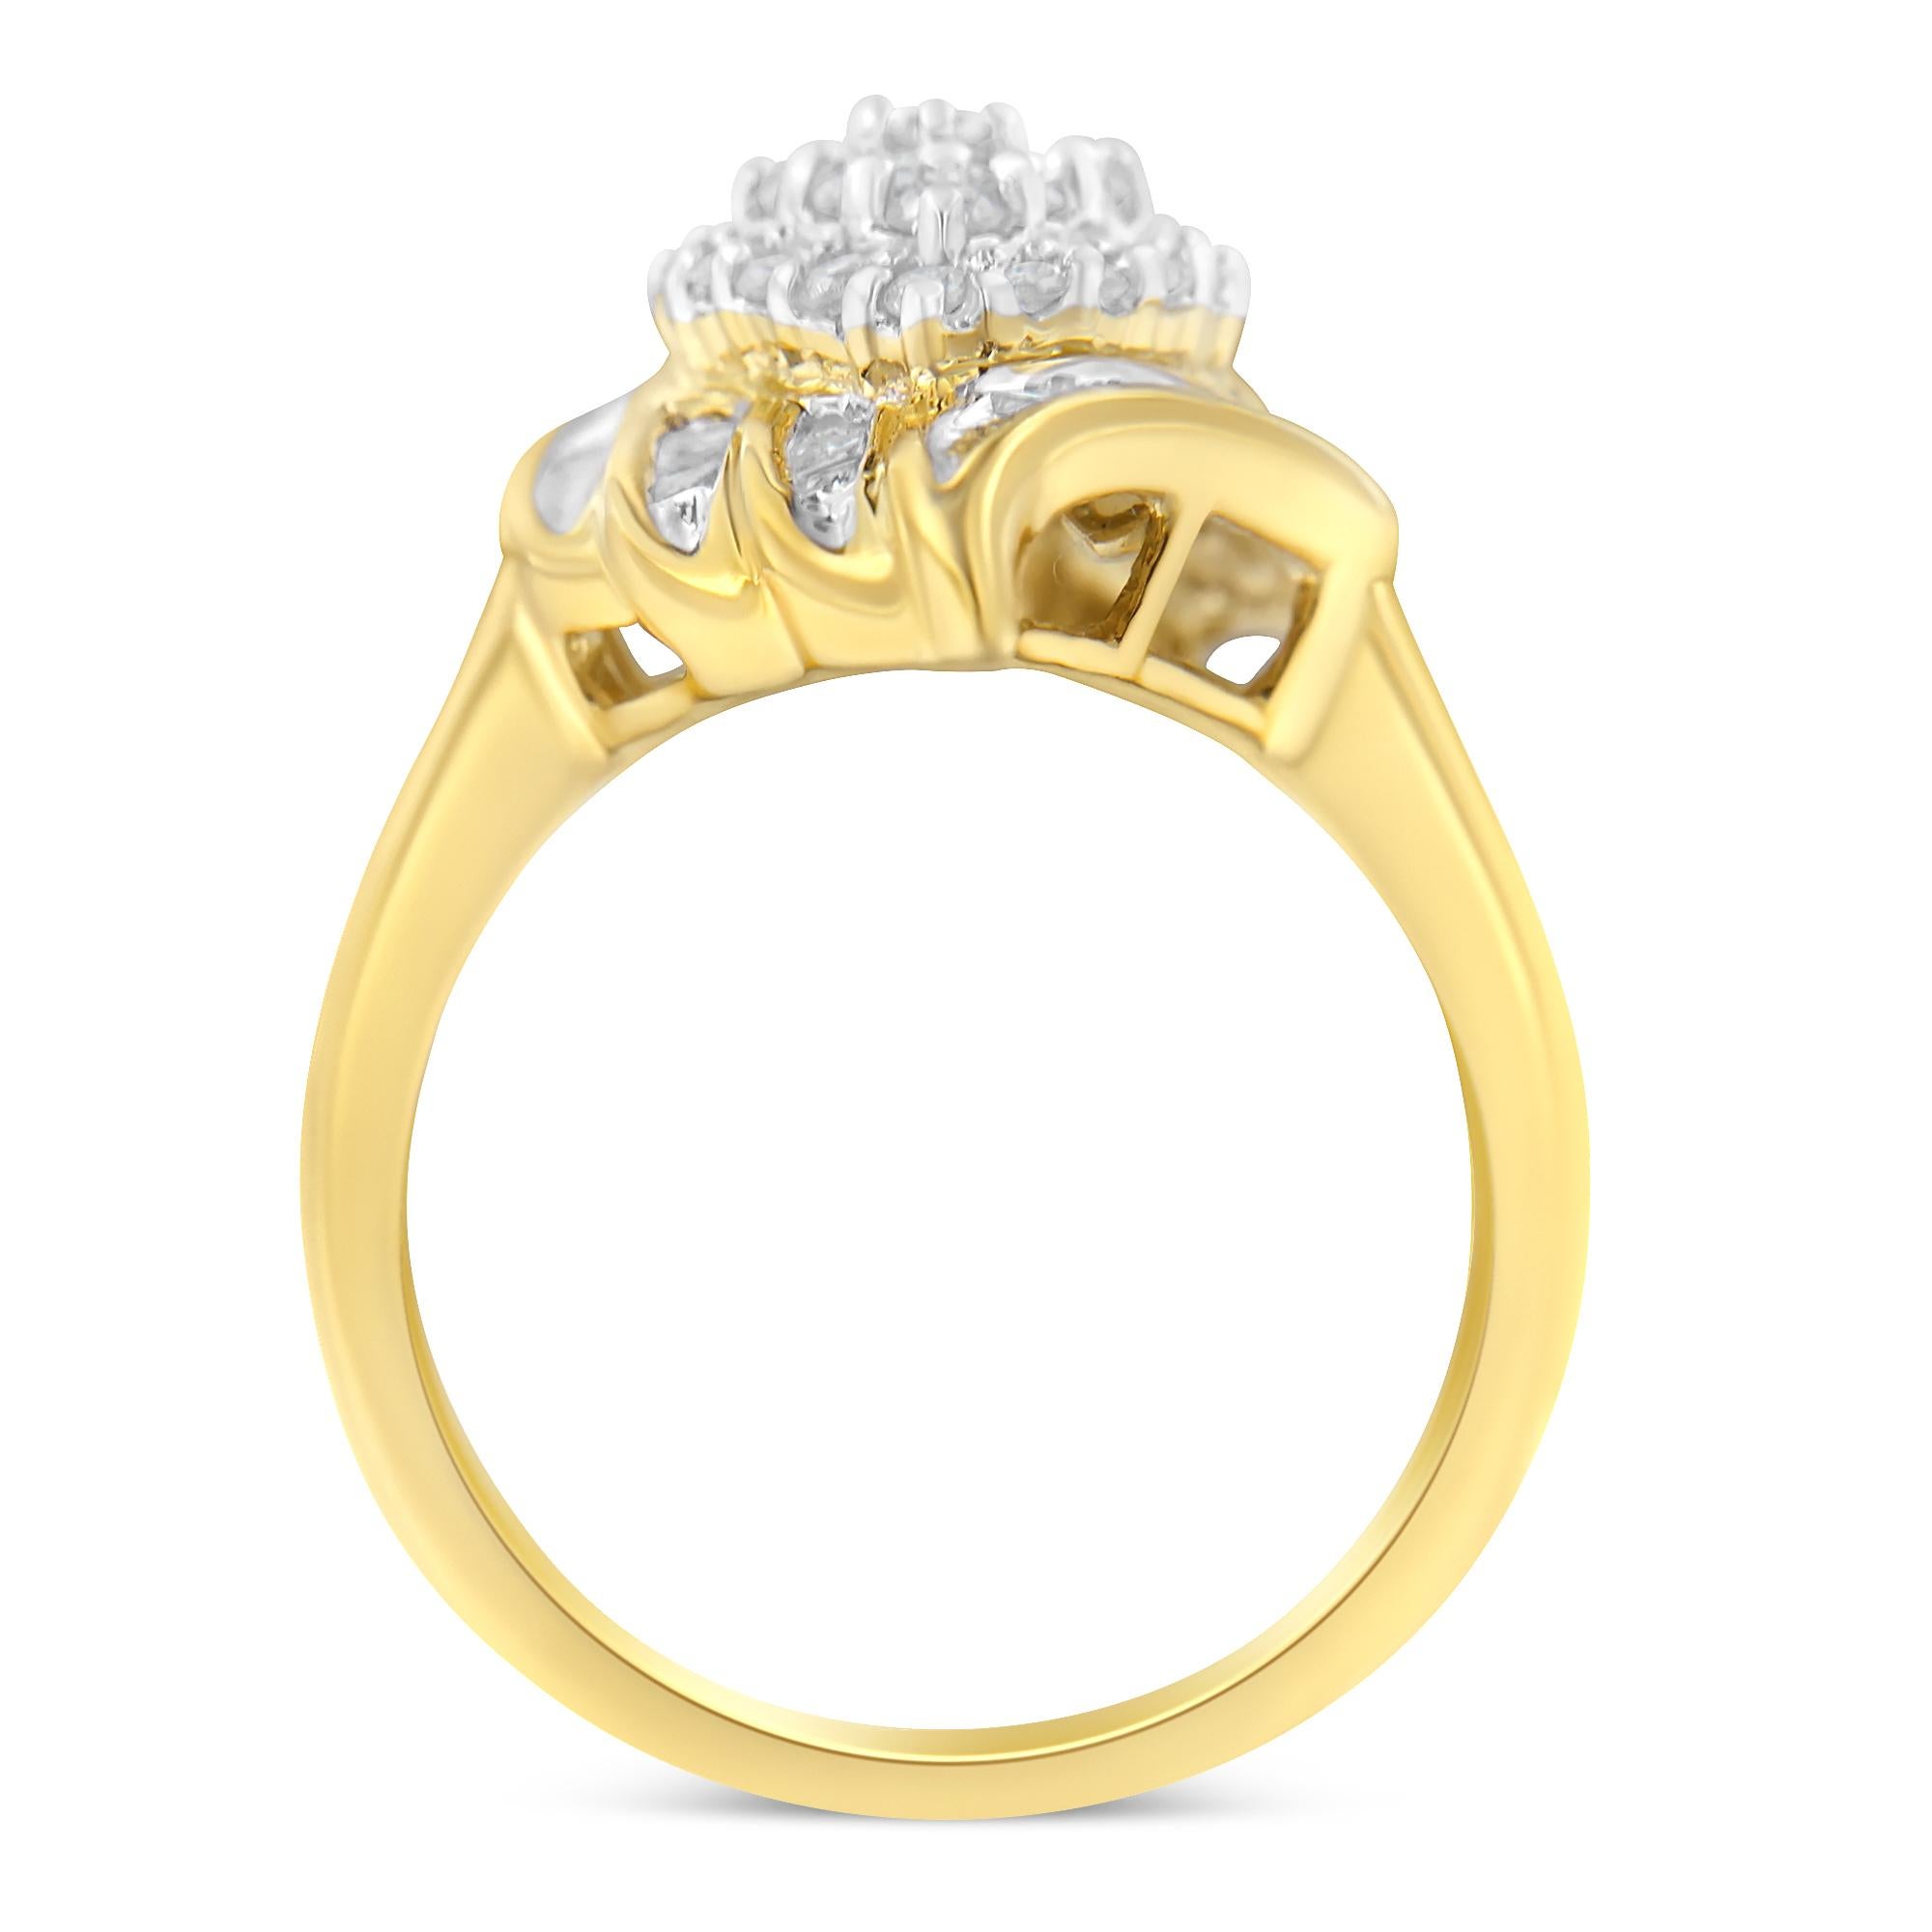 Add this incredibly unique diamond ring to your jewelry collection. Created with the finest 10k yellow gold, this piece is embellished wiht 27 round diamonds in a prong setting, and 32 baguette diamonds in a channel setting. It has a total diamond